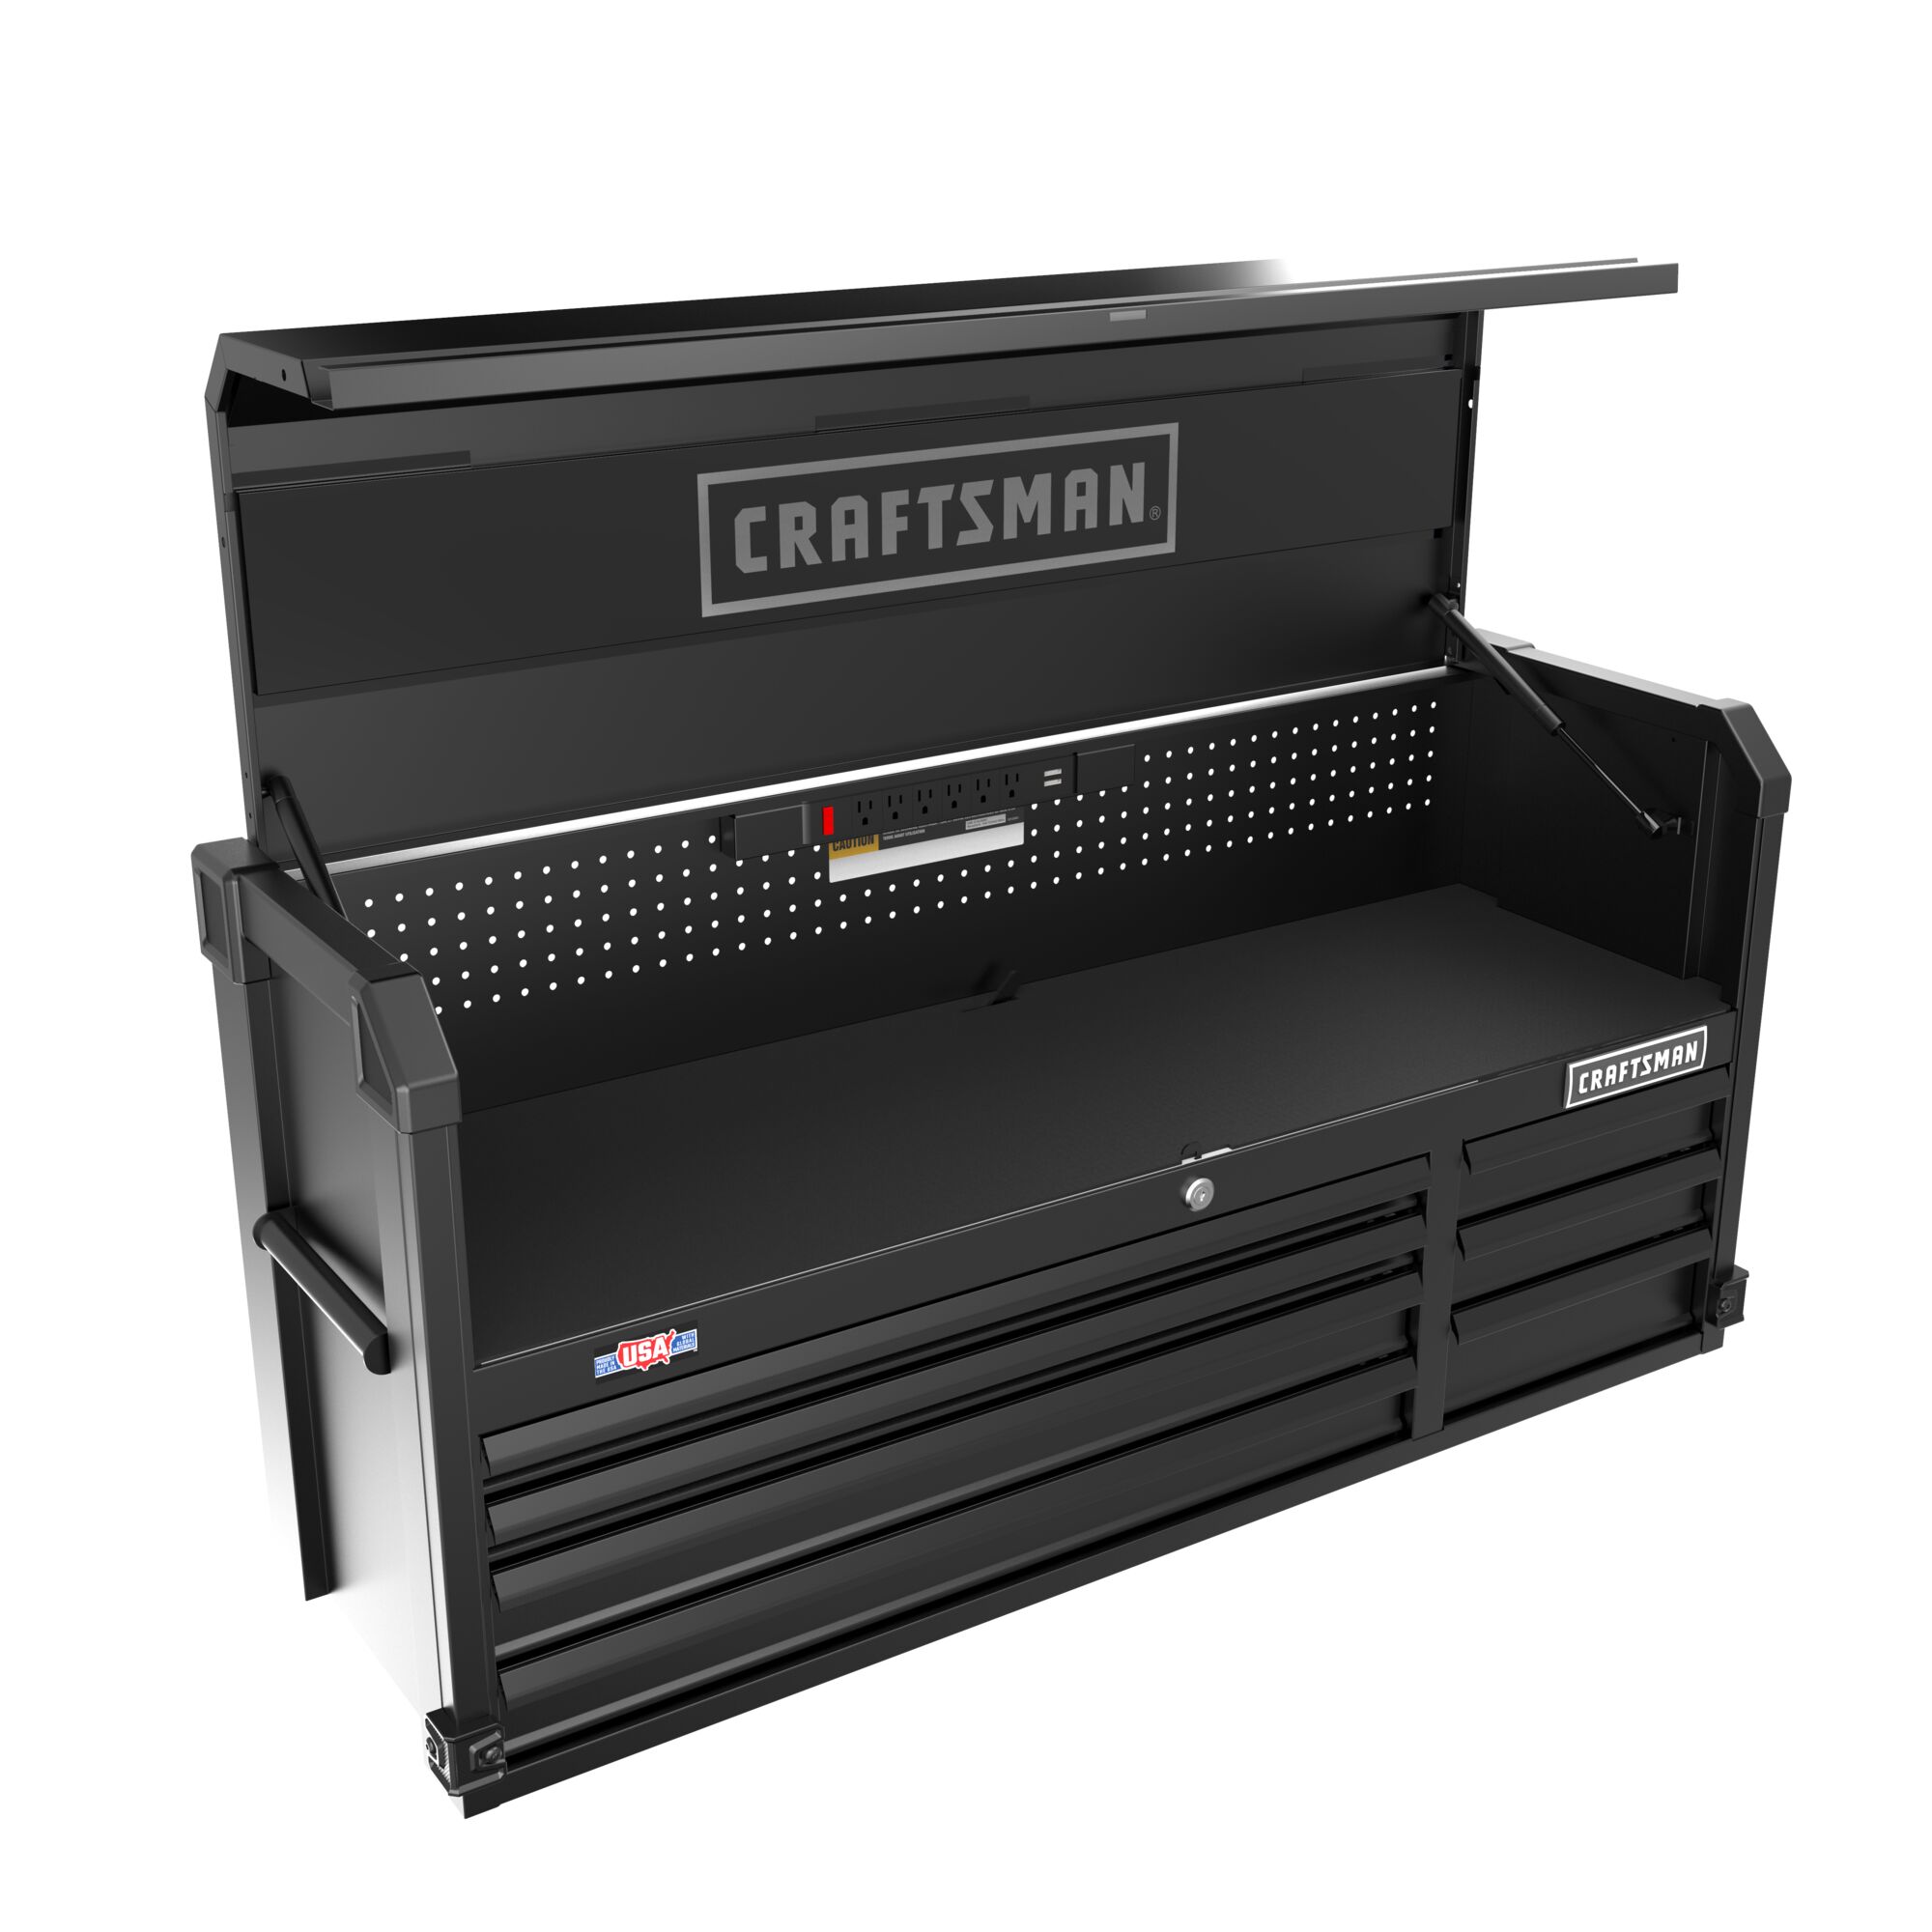 CRAFTSMAN Premium S2000 Series 52-inch Wide 7-Drawer Tool Chest atop a 52-inch Wide Rolling Tool Cabinet with lid open